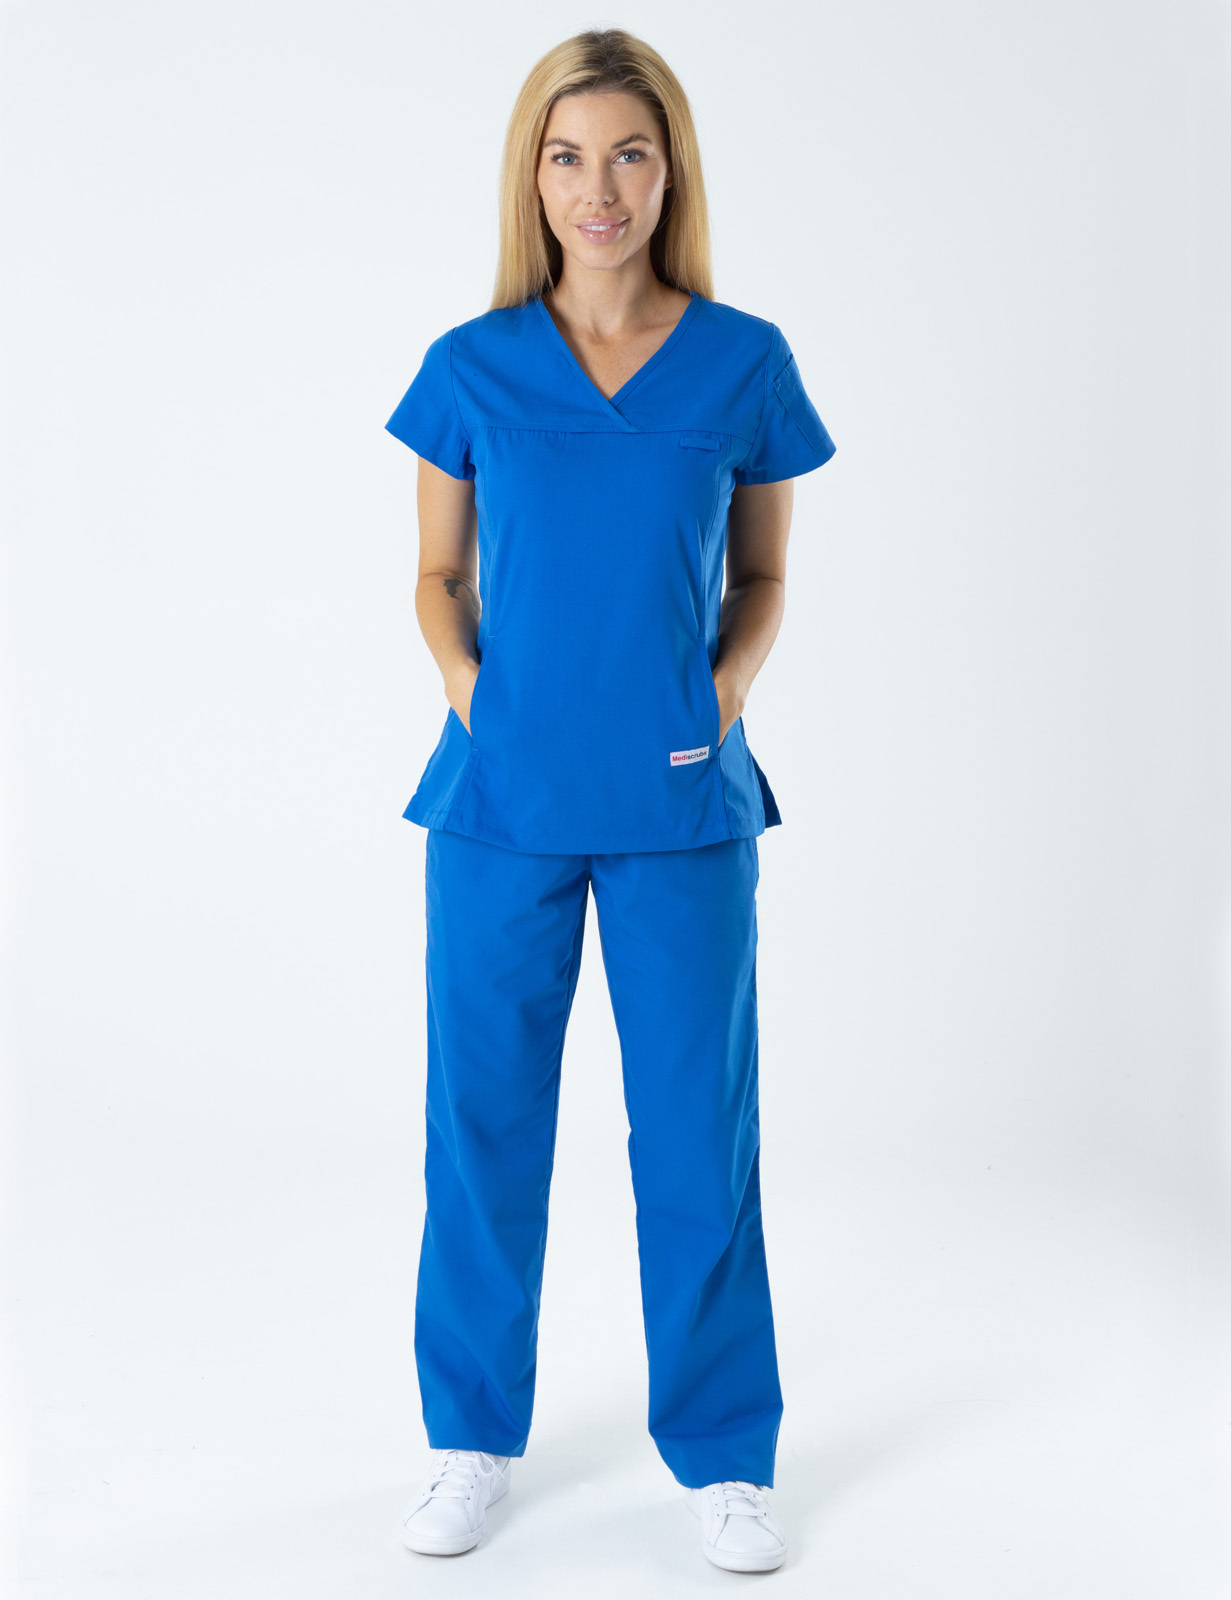 Capricorn Coast Hospital - CN (Women's Fit Solid Scrub Top and Cargo Pants in Royal incl Logos)